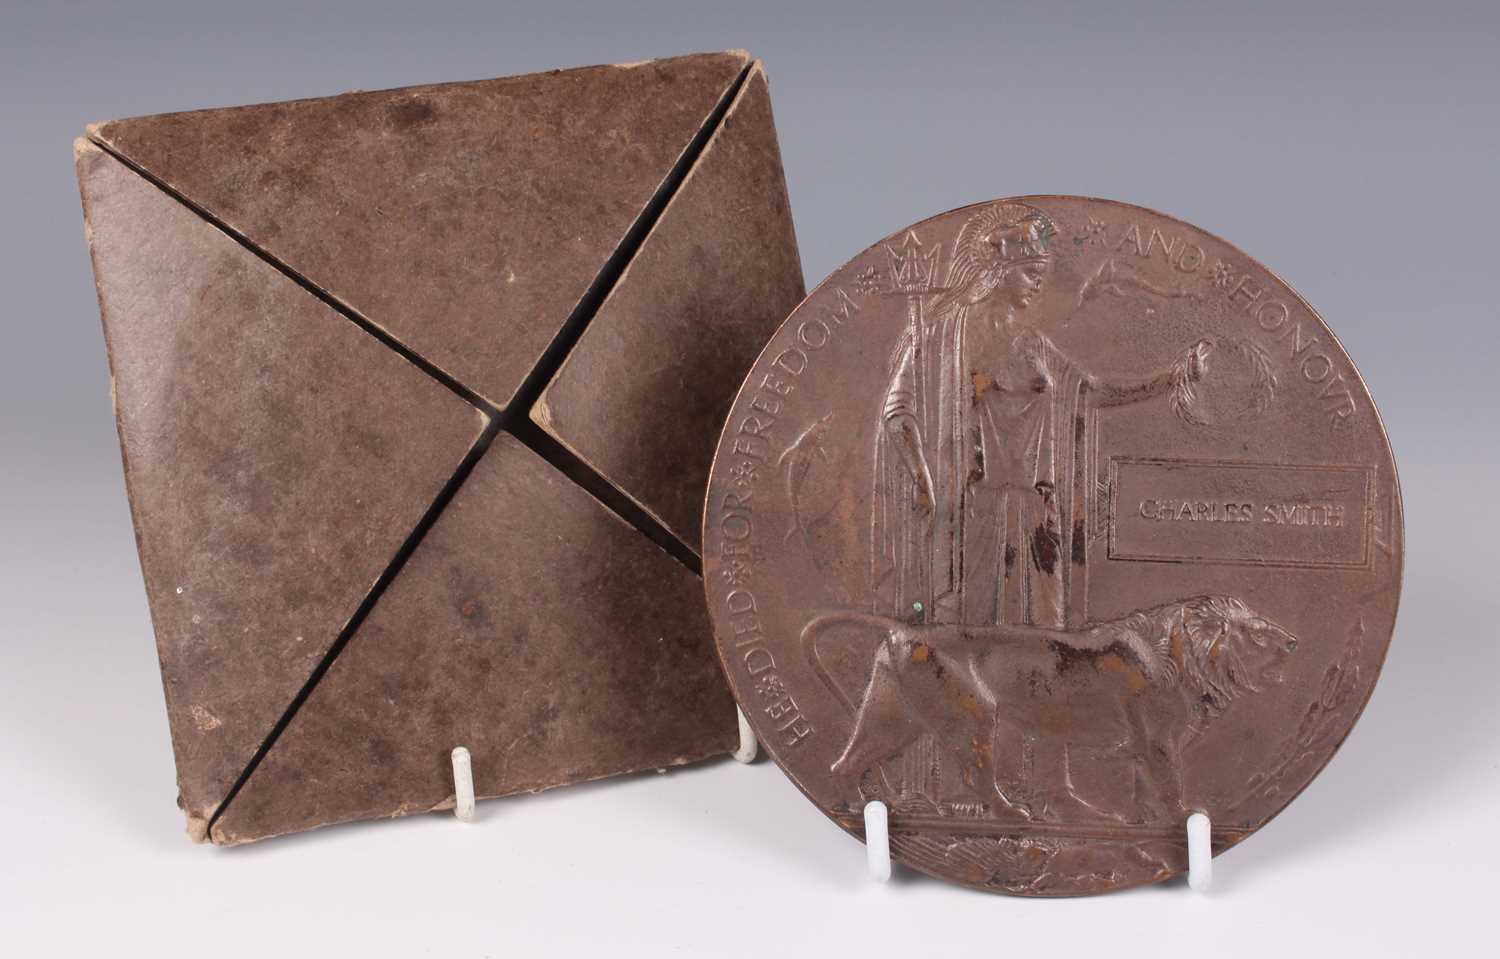 A First World War period bronze memorial plaque, detailed ‘Charles Smith’, with the original folding